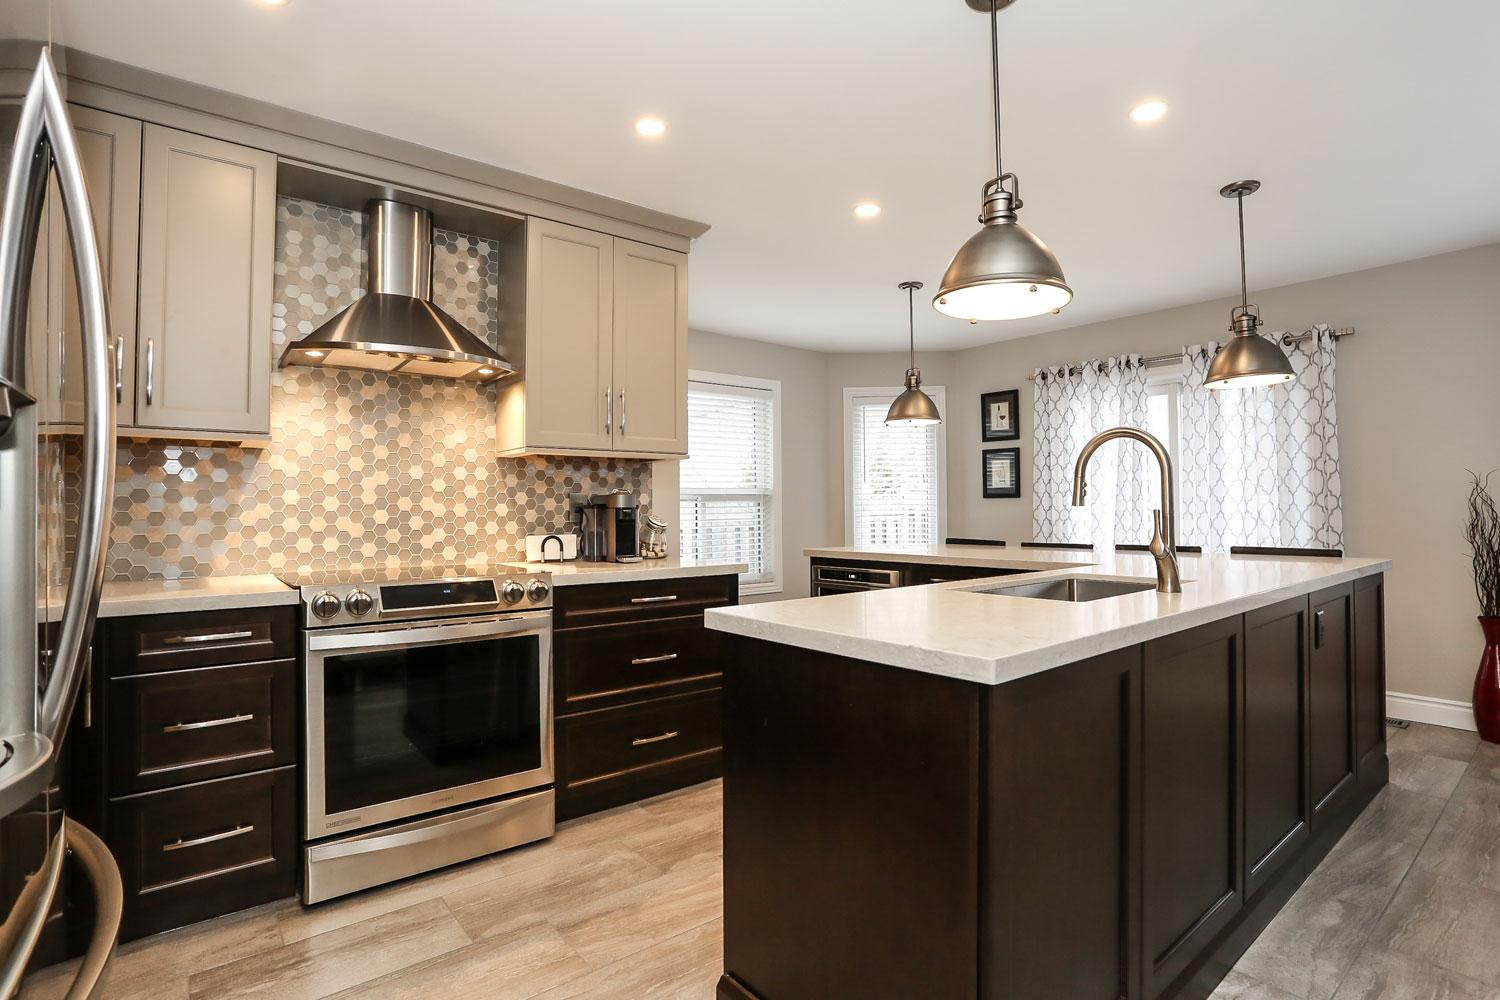 Kitchen design with large island with eating bar, warm grey and dark brown cabinets, stainless steel appliances, and stunning mosaic backsplash - total living concepts in barrie ontario